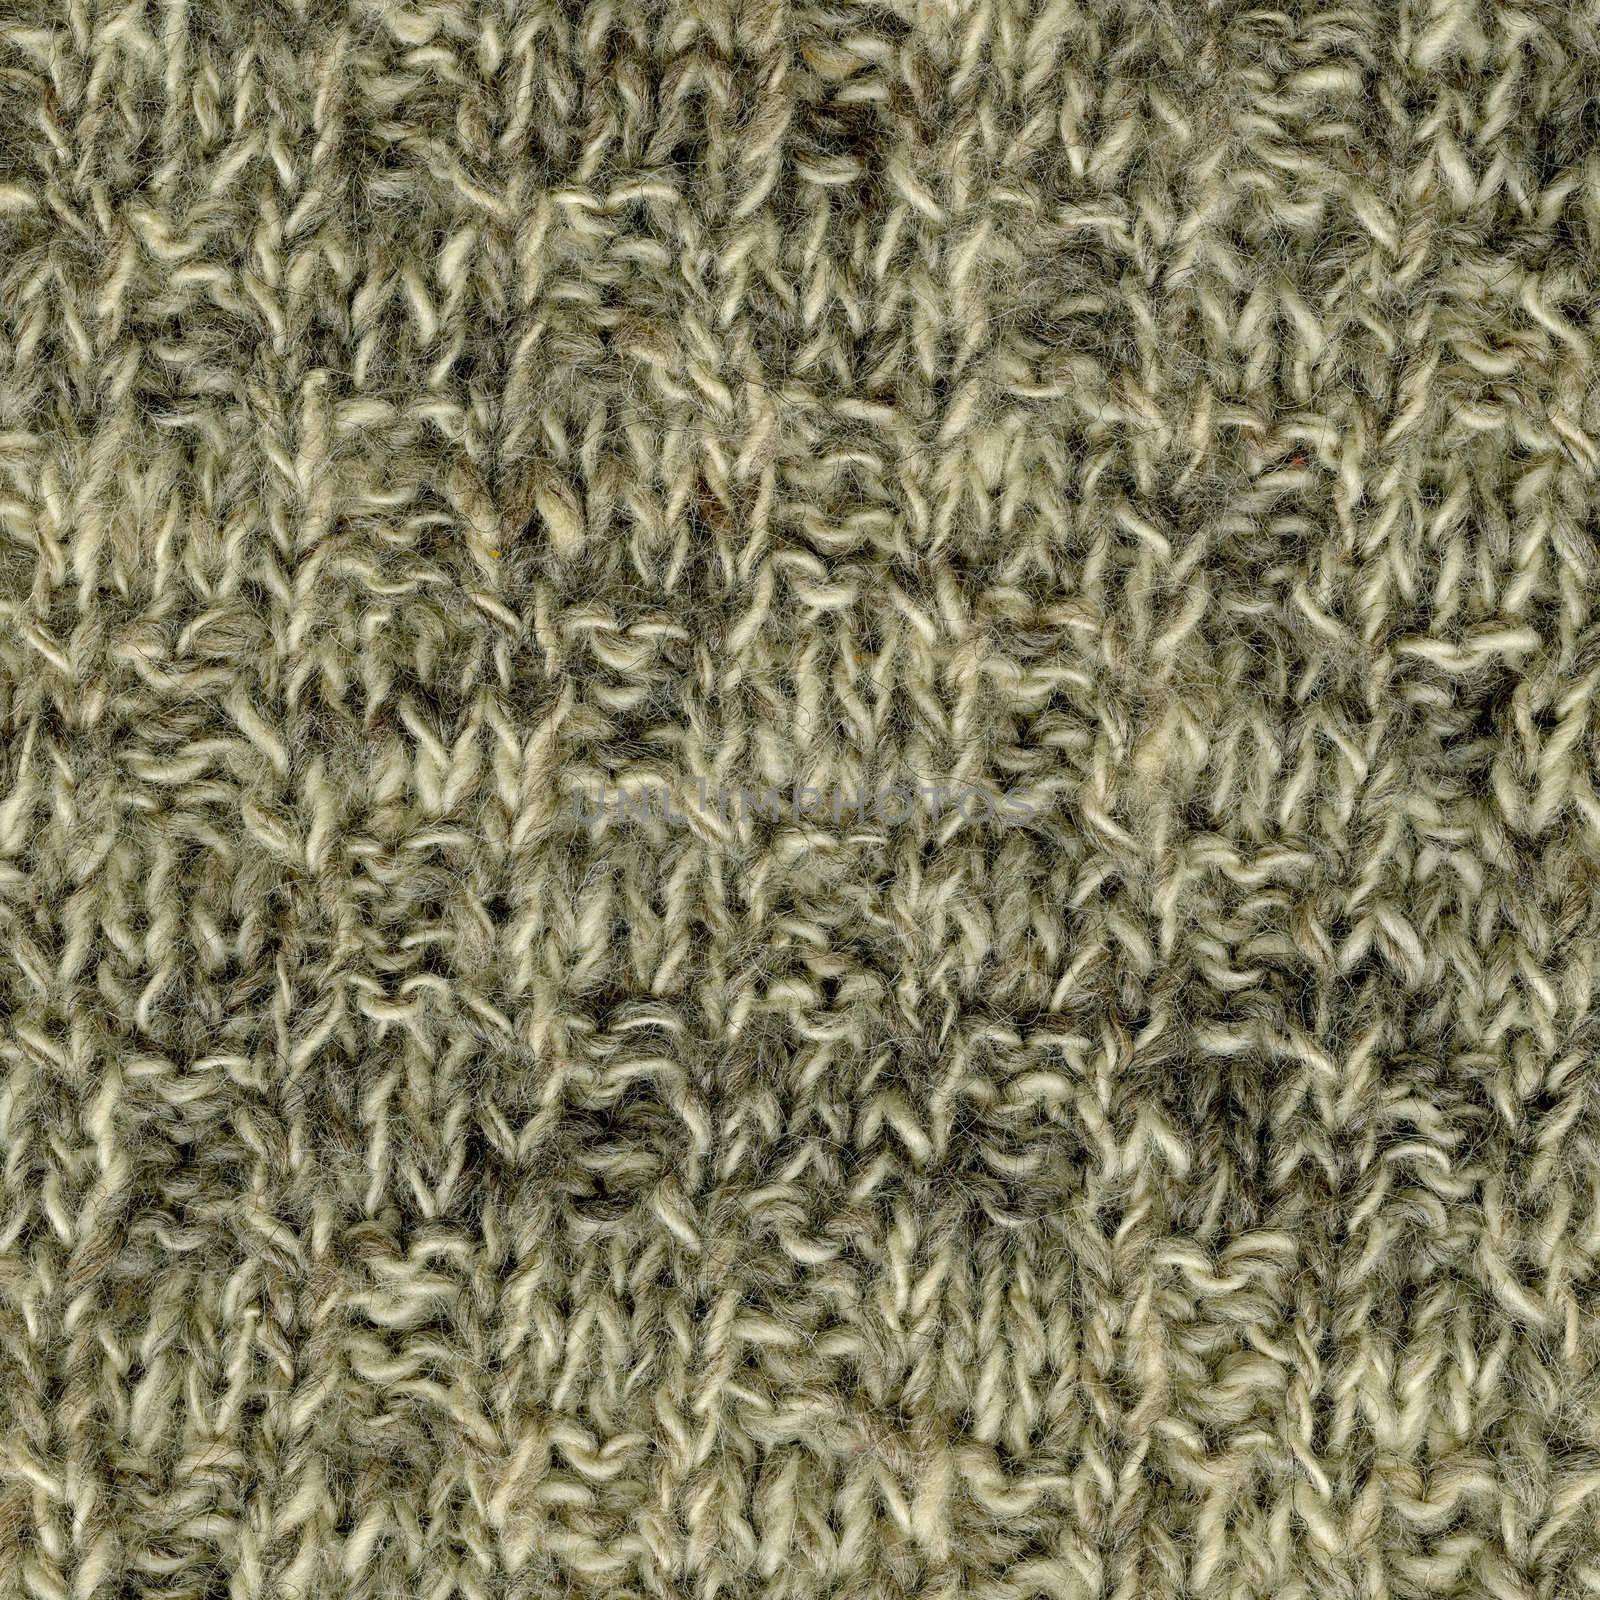 handmade knitted wool texture by PixelsAway